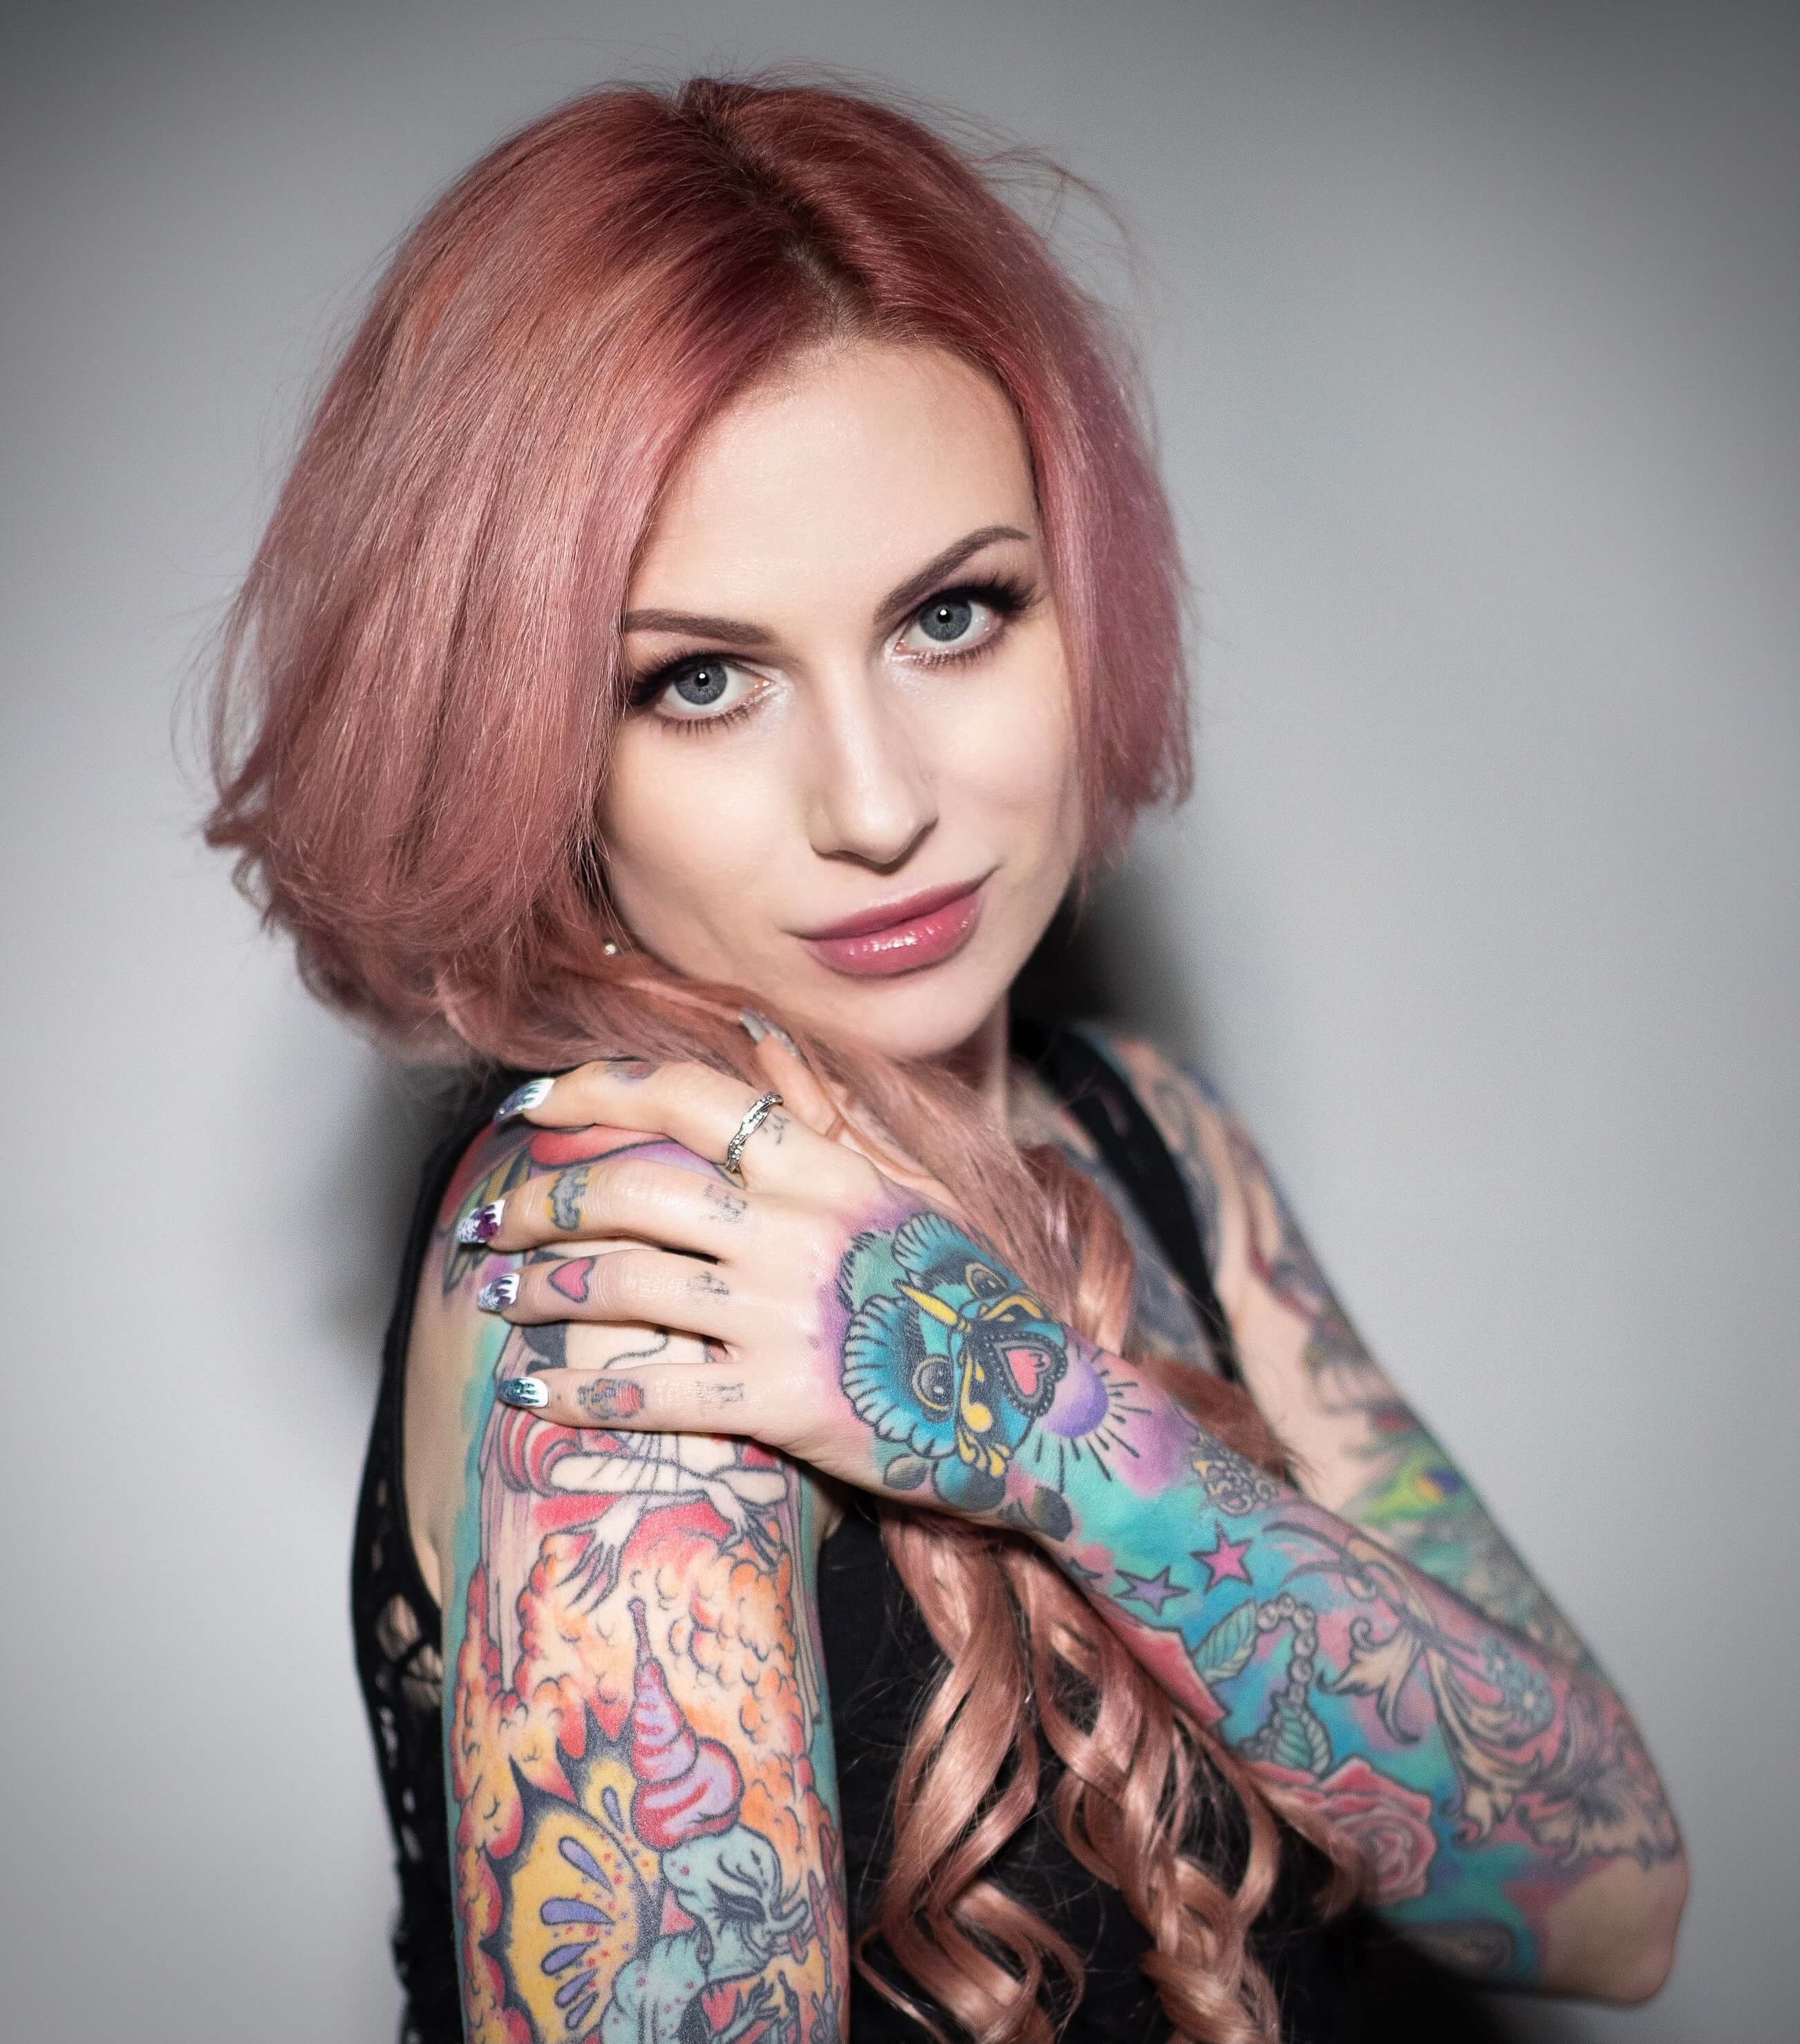 Do tattoos and hair dye really affect getting a job? – The Black and White